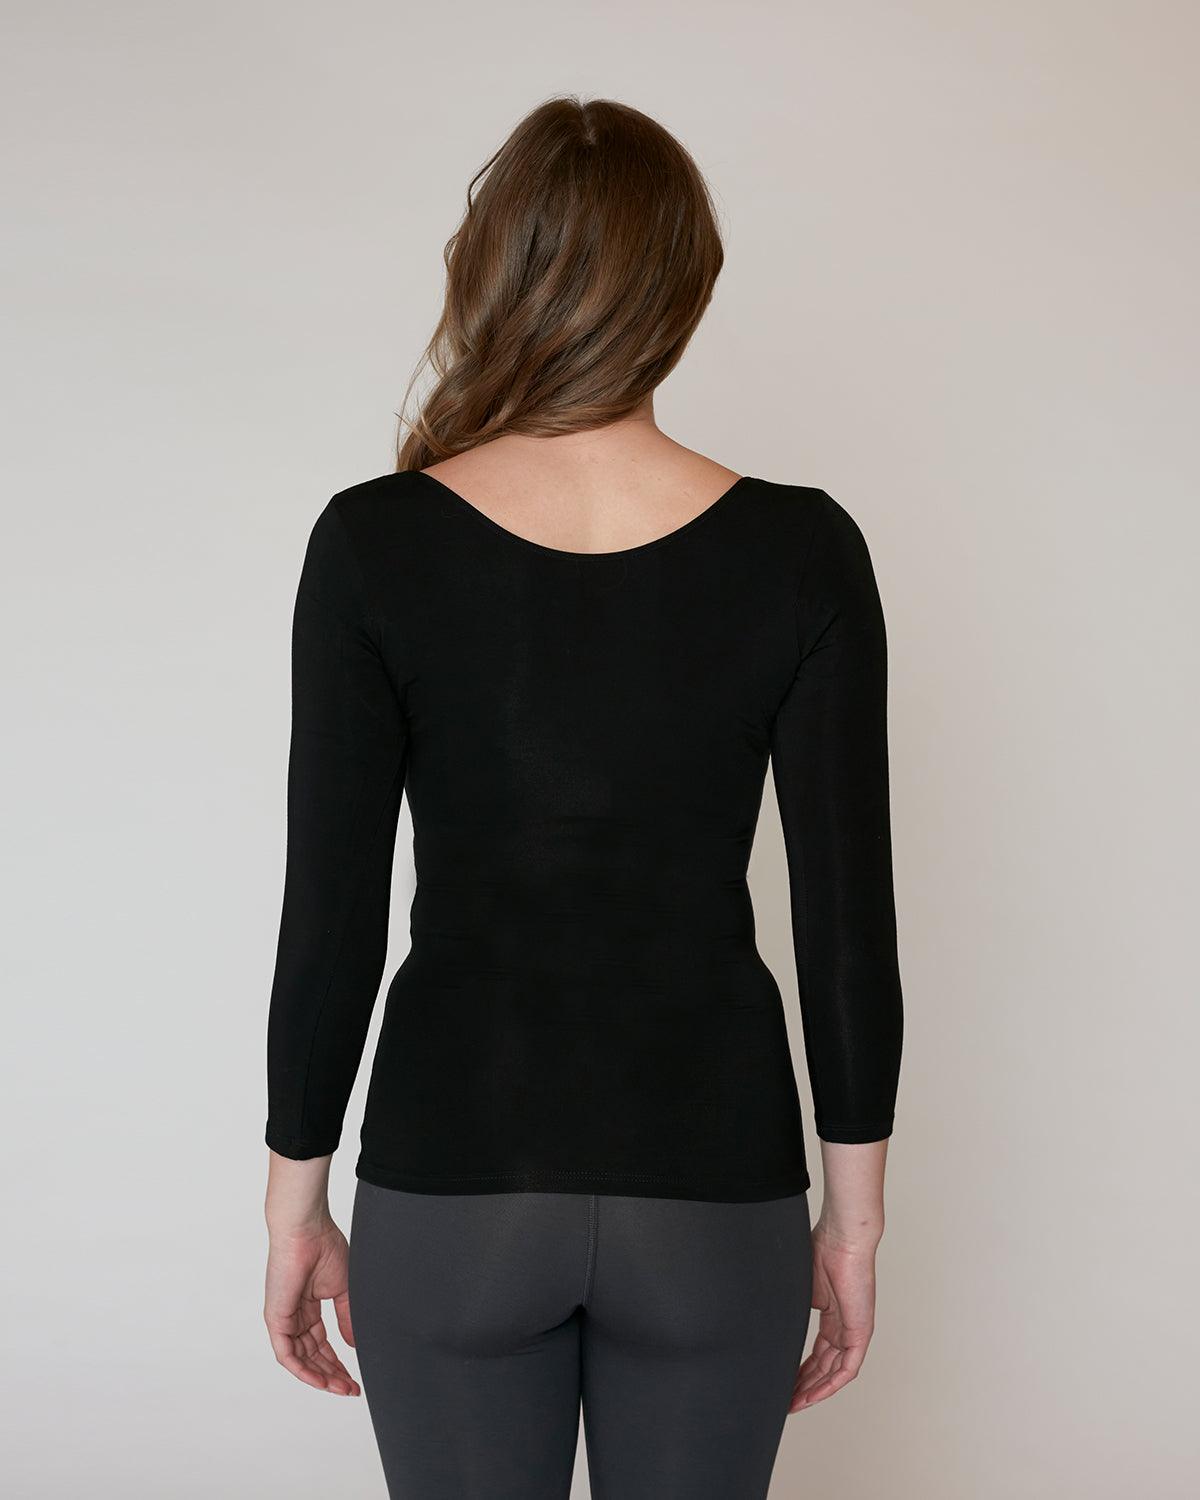 "#color_BLACK|Siobhan is 5'8.5" and wears a size S